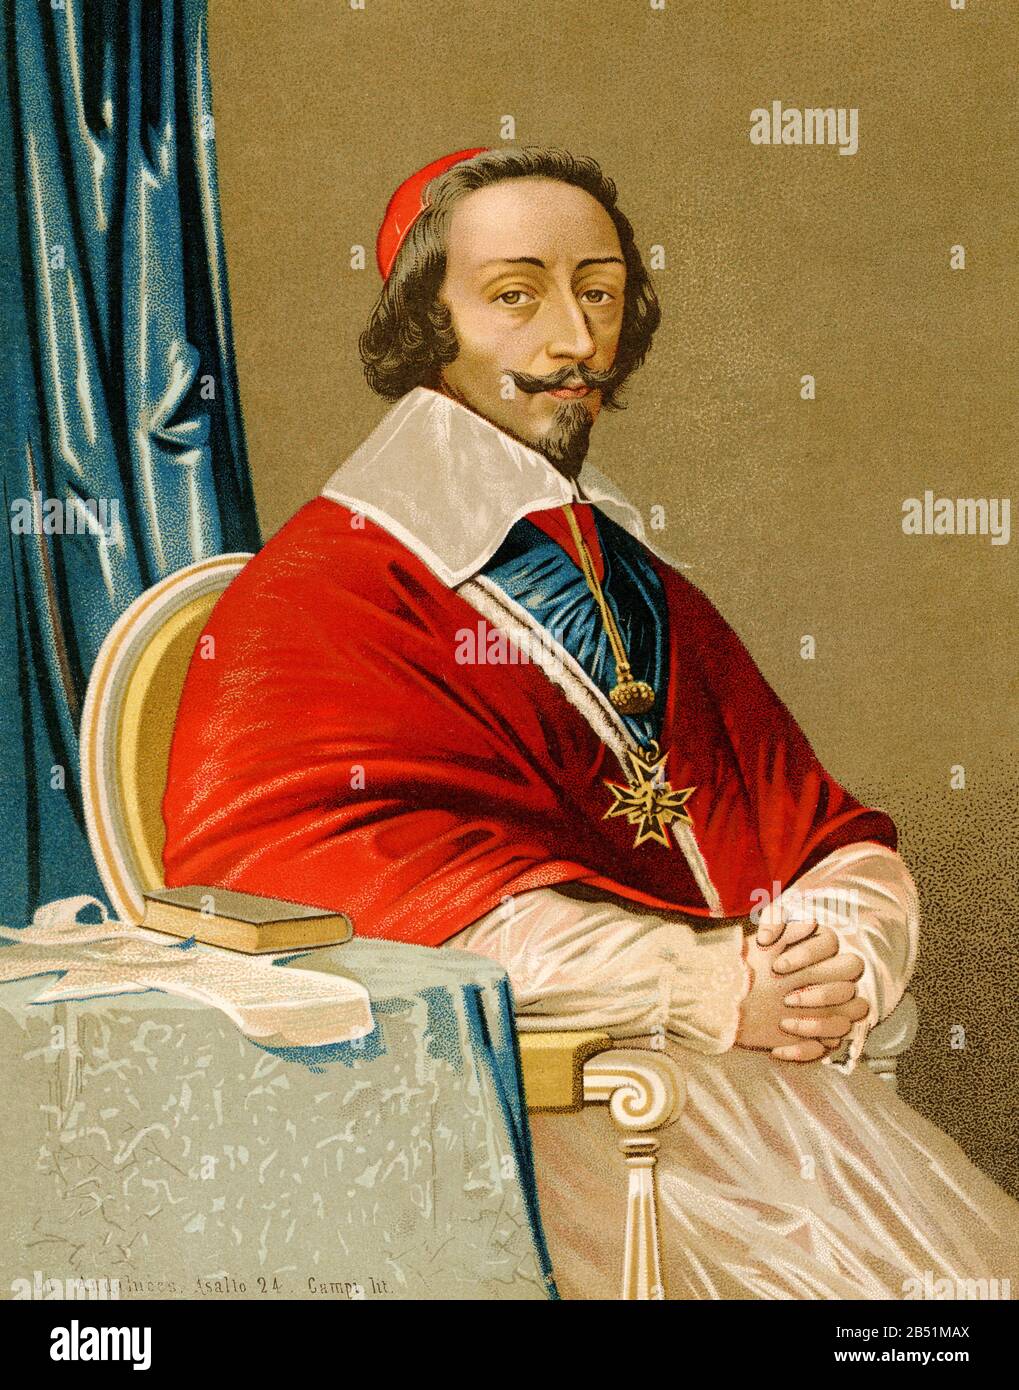 Old color lithography portrait. Armand Jean du Plessis (Paris 1585 - 1642), Cardinal Duke of Richelieu, Duke of Fronsac and couple of France, was a Fr Stock Photo